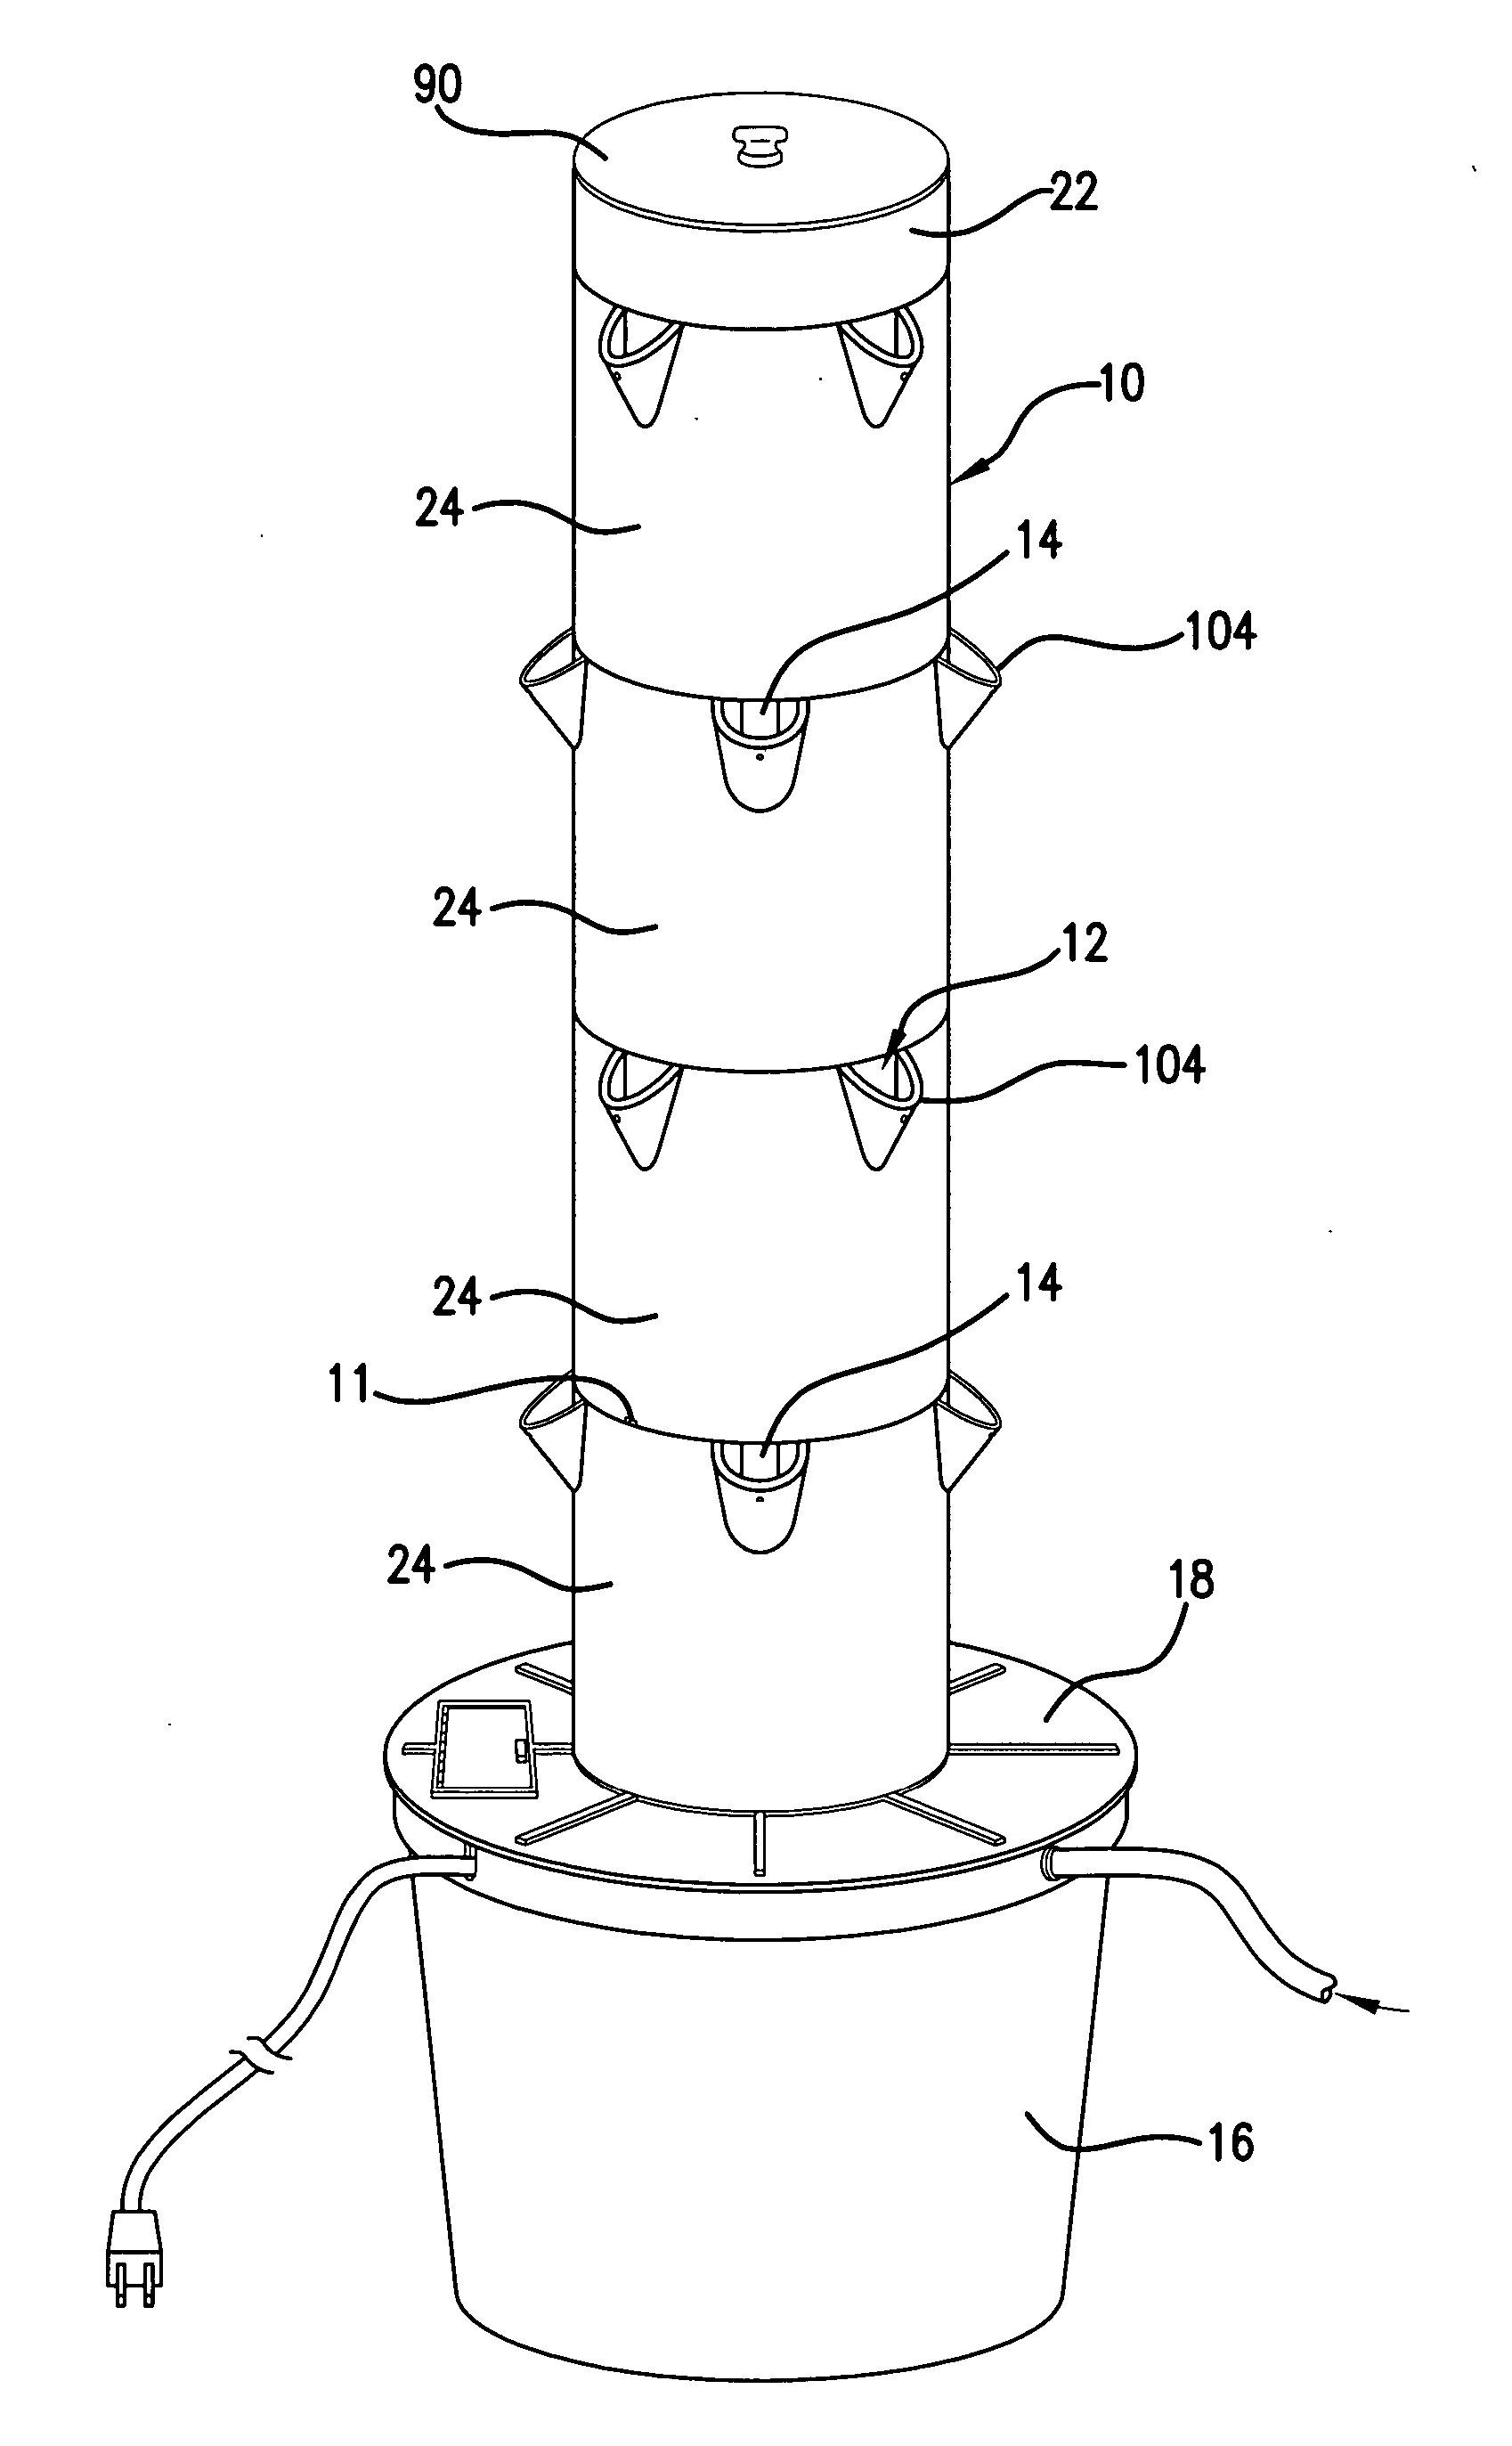 Hydroponic plant cultivating apparatus